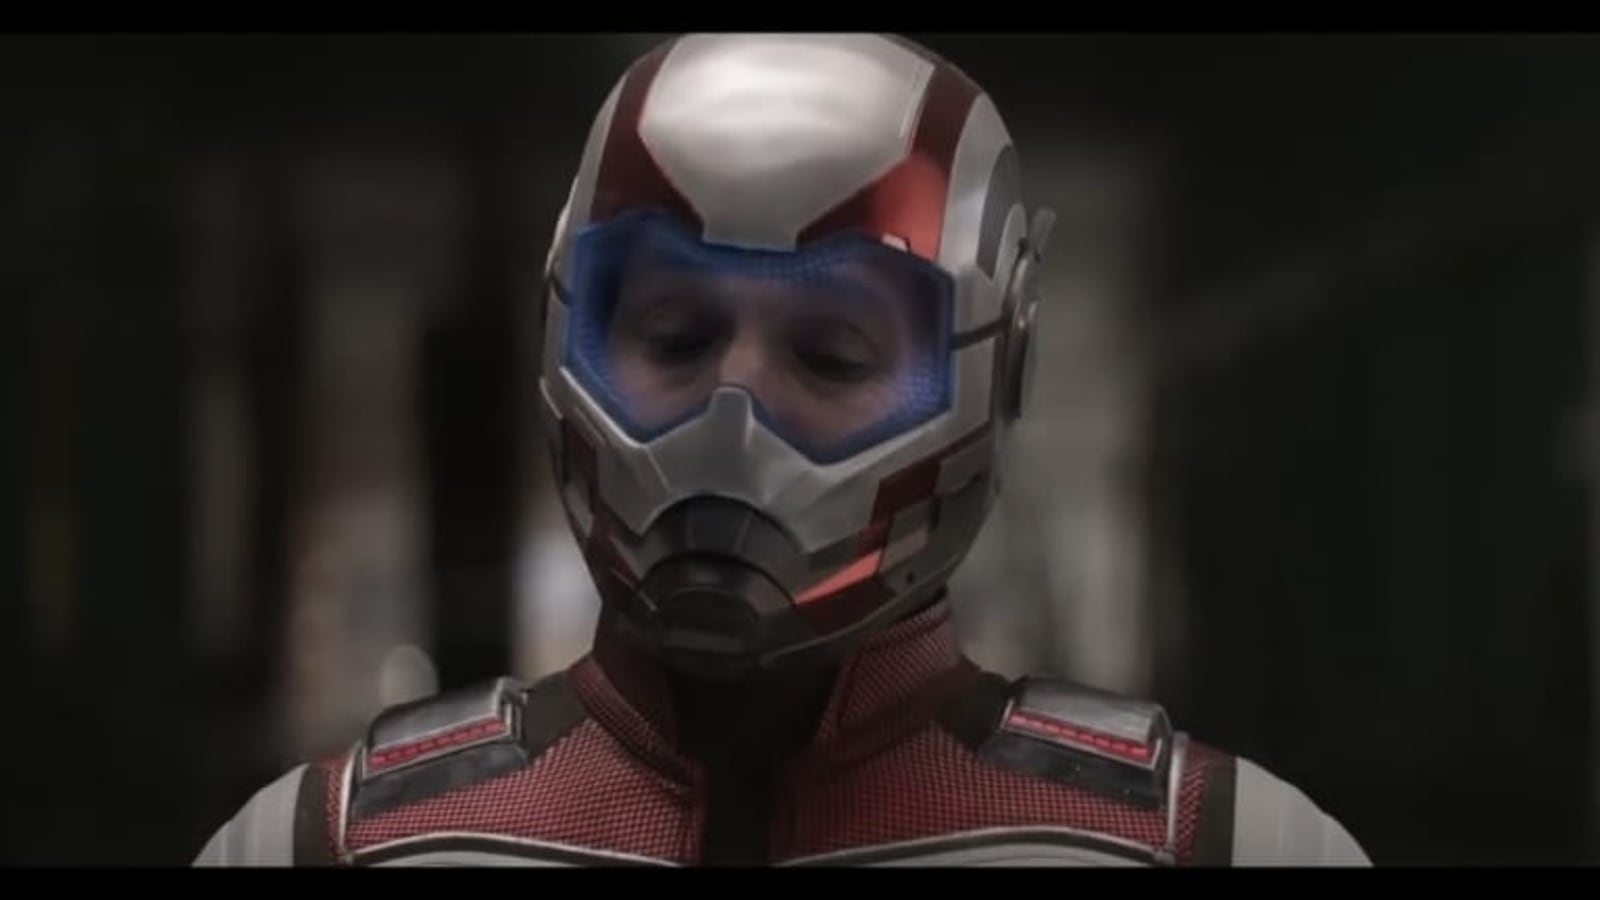 Ant Man and the Wasp: Quantamania Ott Release: Ant-Man and the